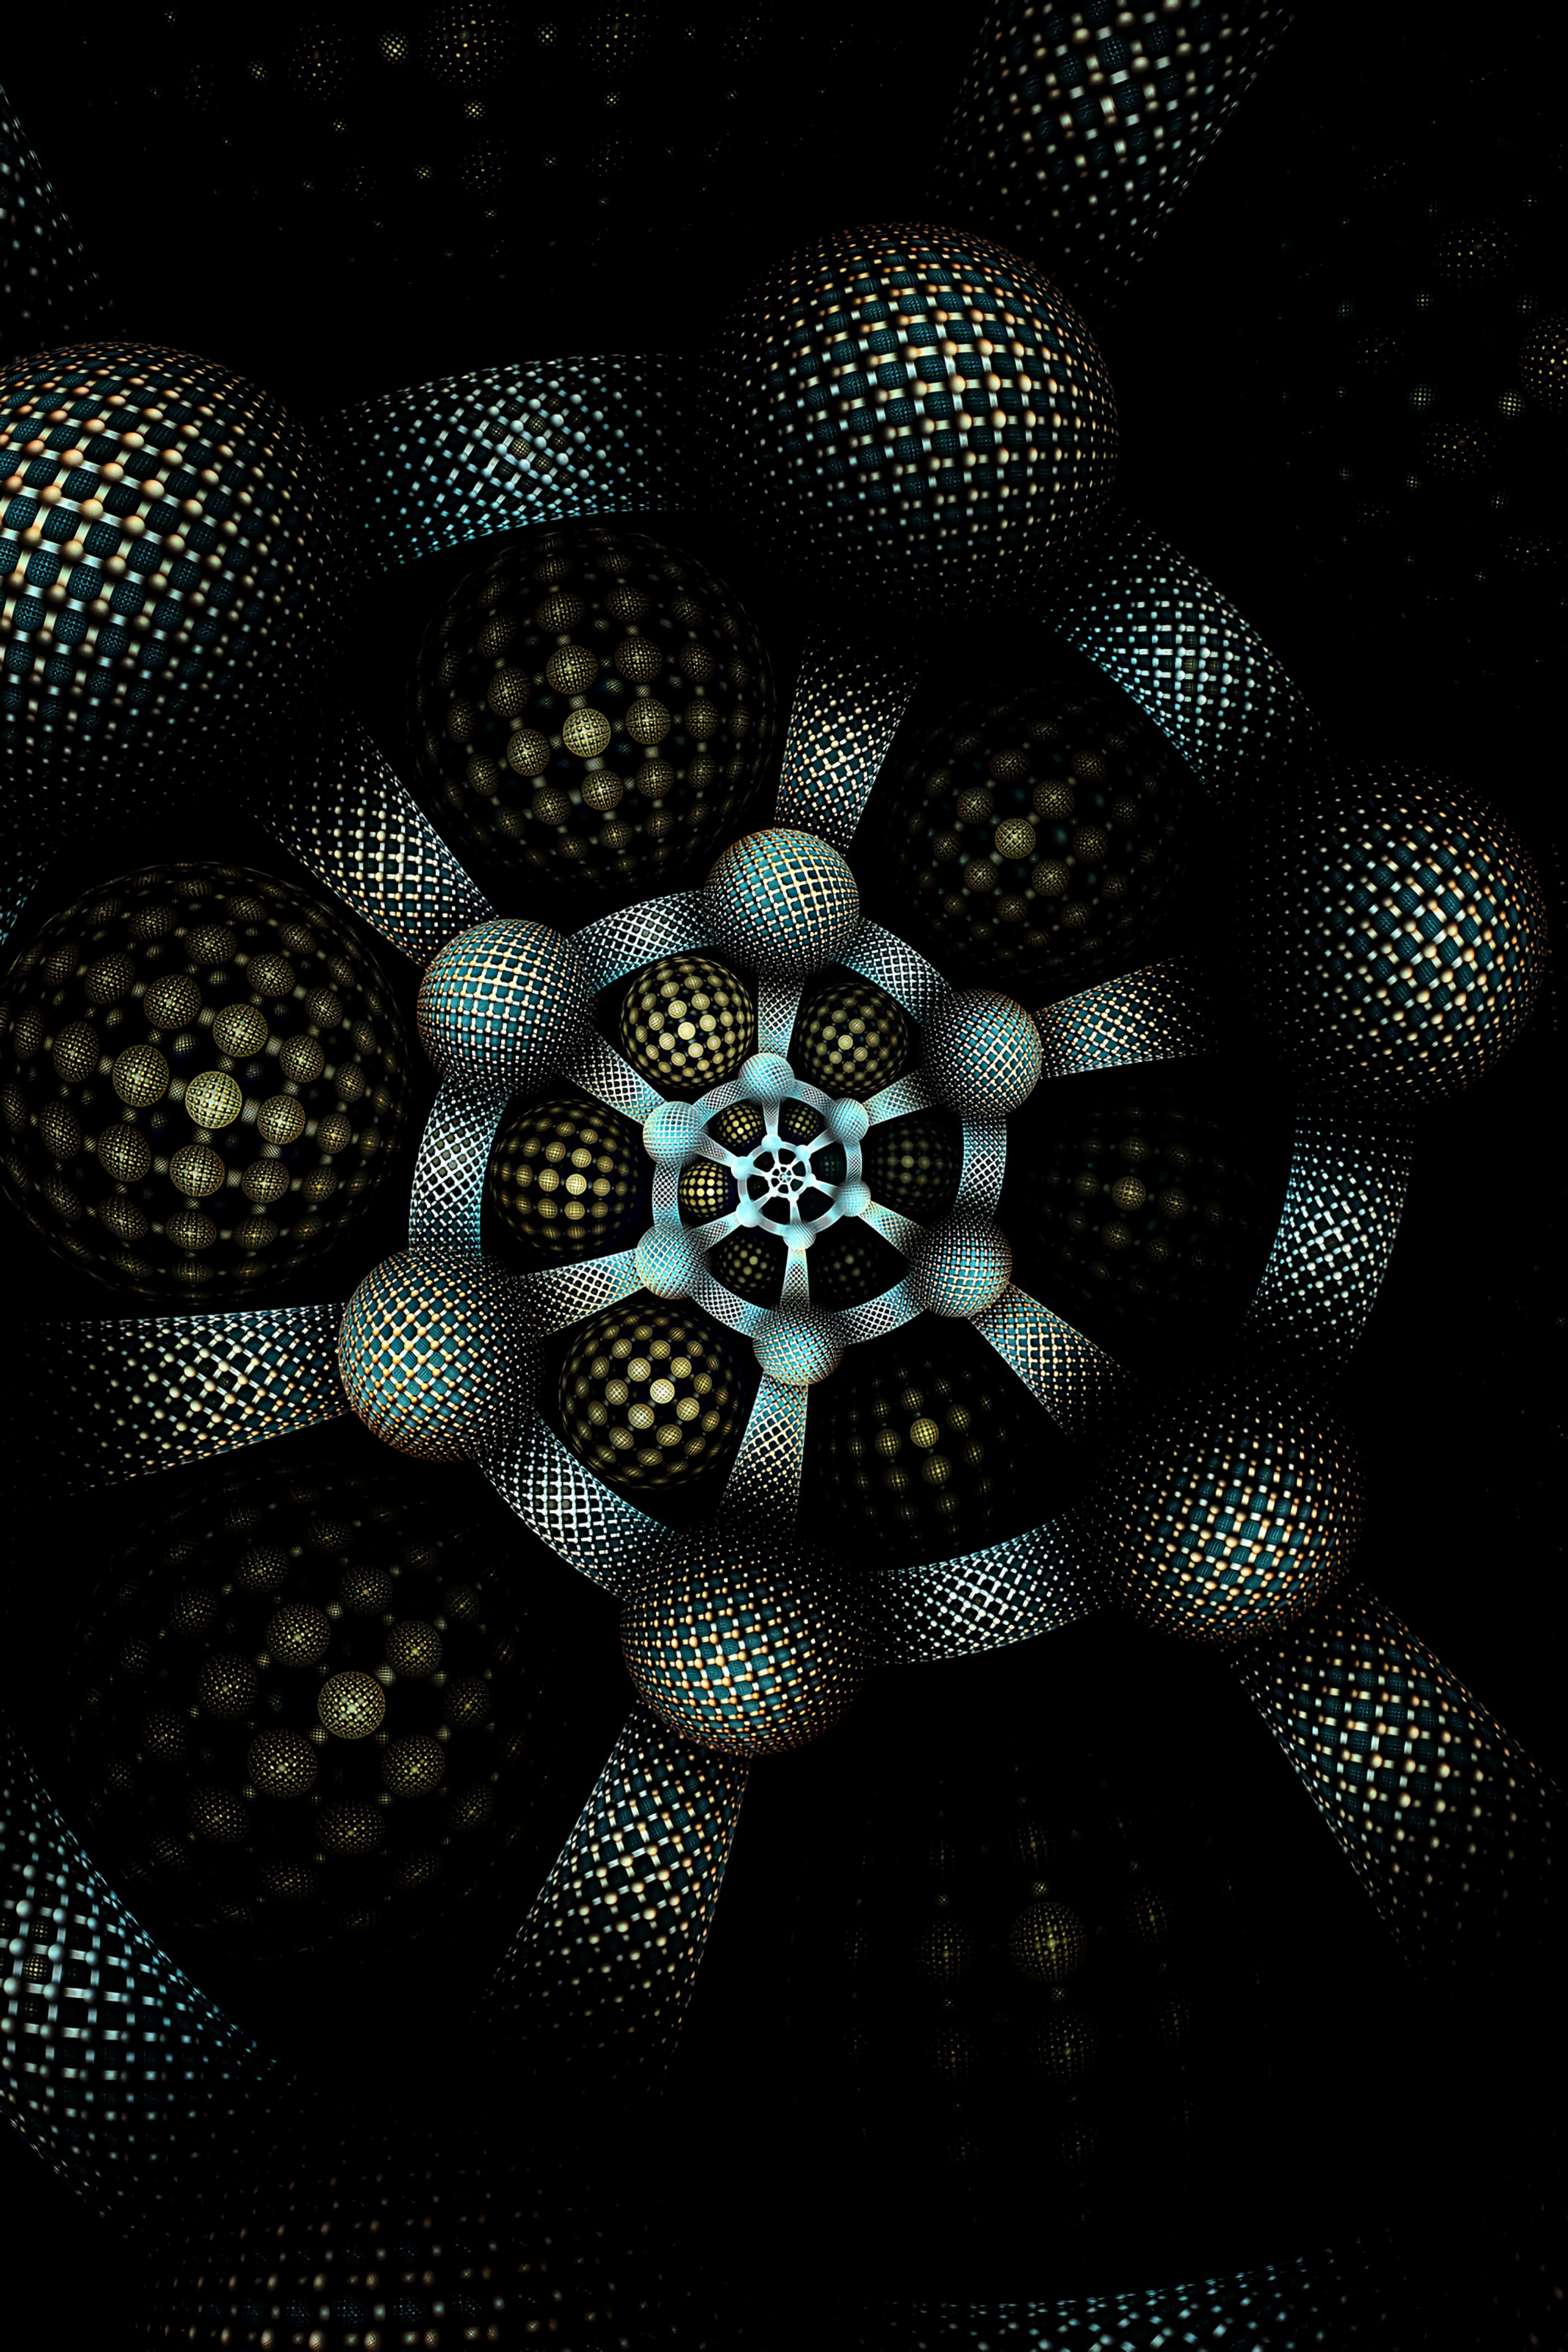 dark, form, circles, involute, abstract, pattern, fractal, swirling QHD